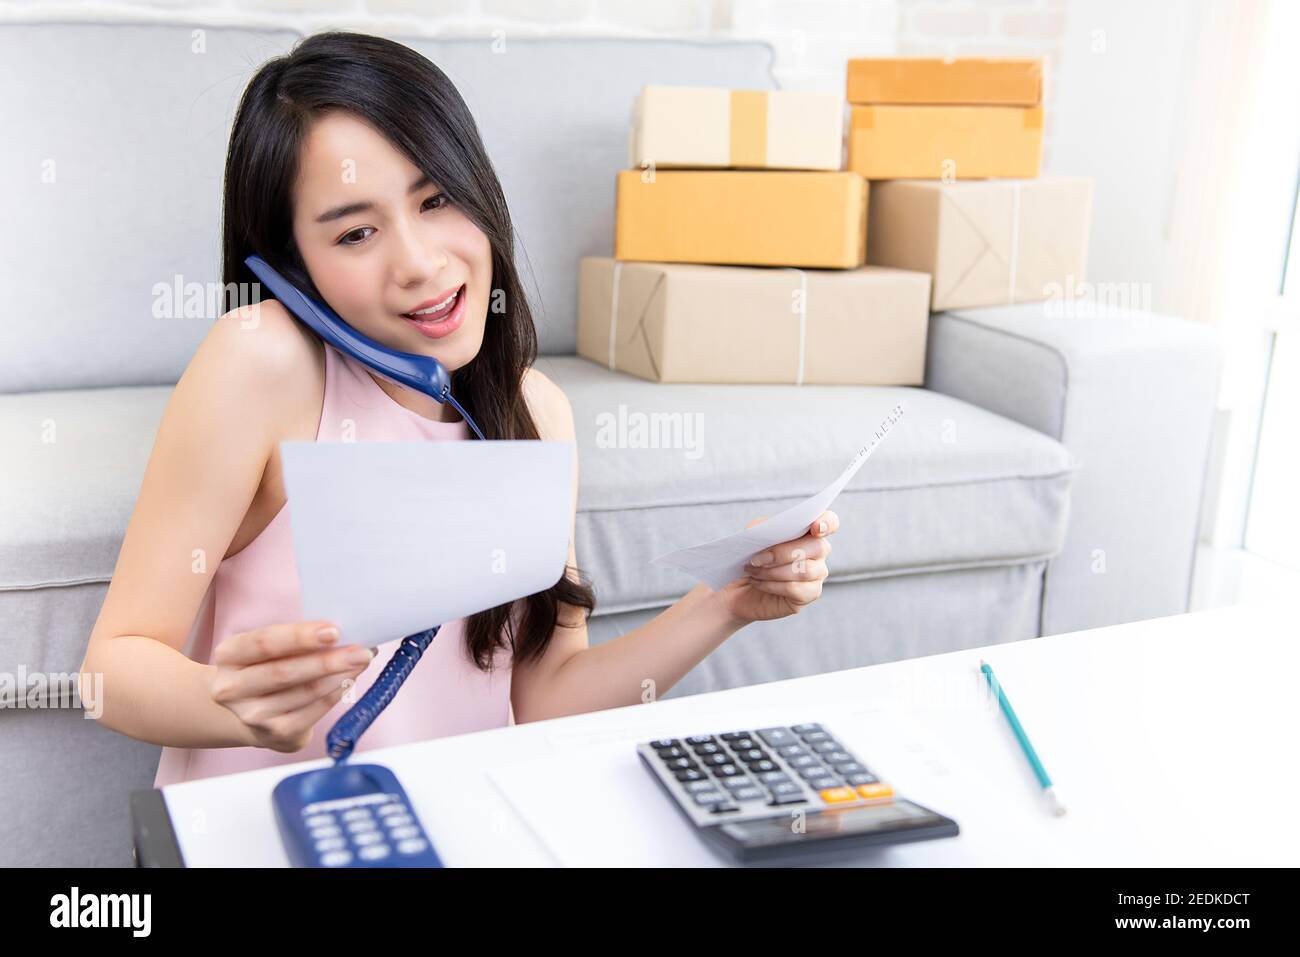 Young Asian woman entrepreneur or freelance online seller working at home confirming orders from customer on the phone preparing for delivery Stock Photo